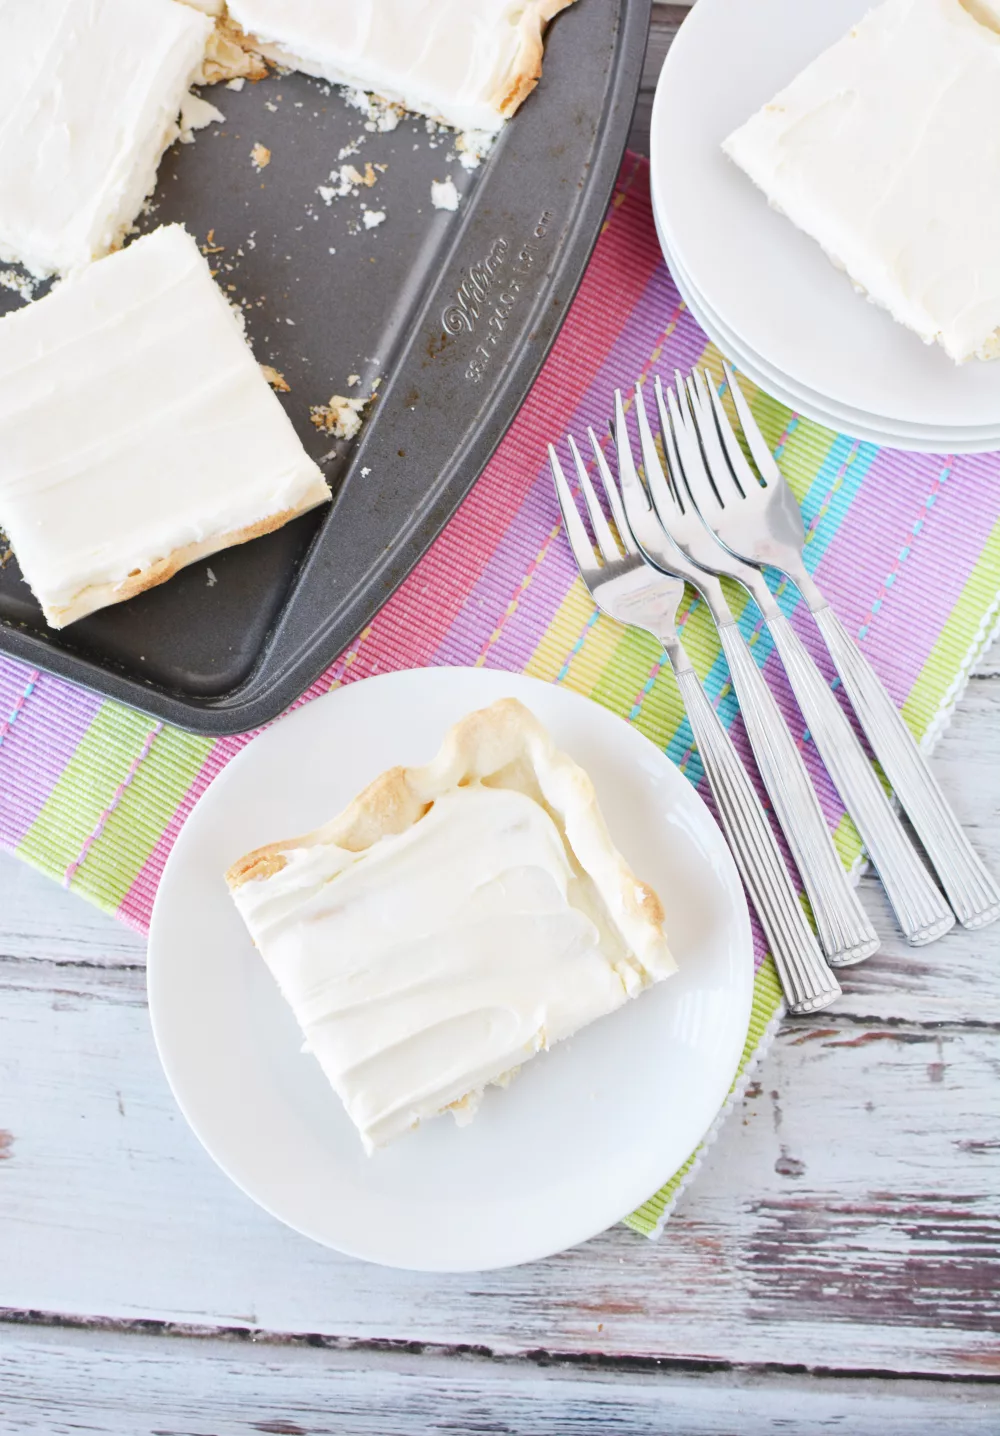 cheese cake served on white plates with colorful napkins and forks on the table